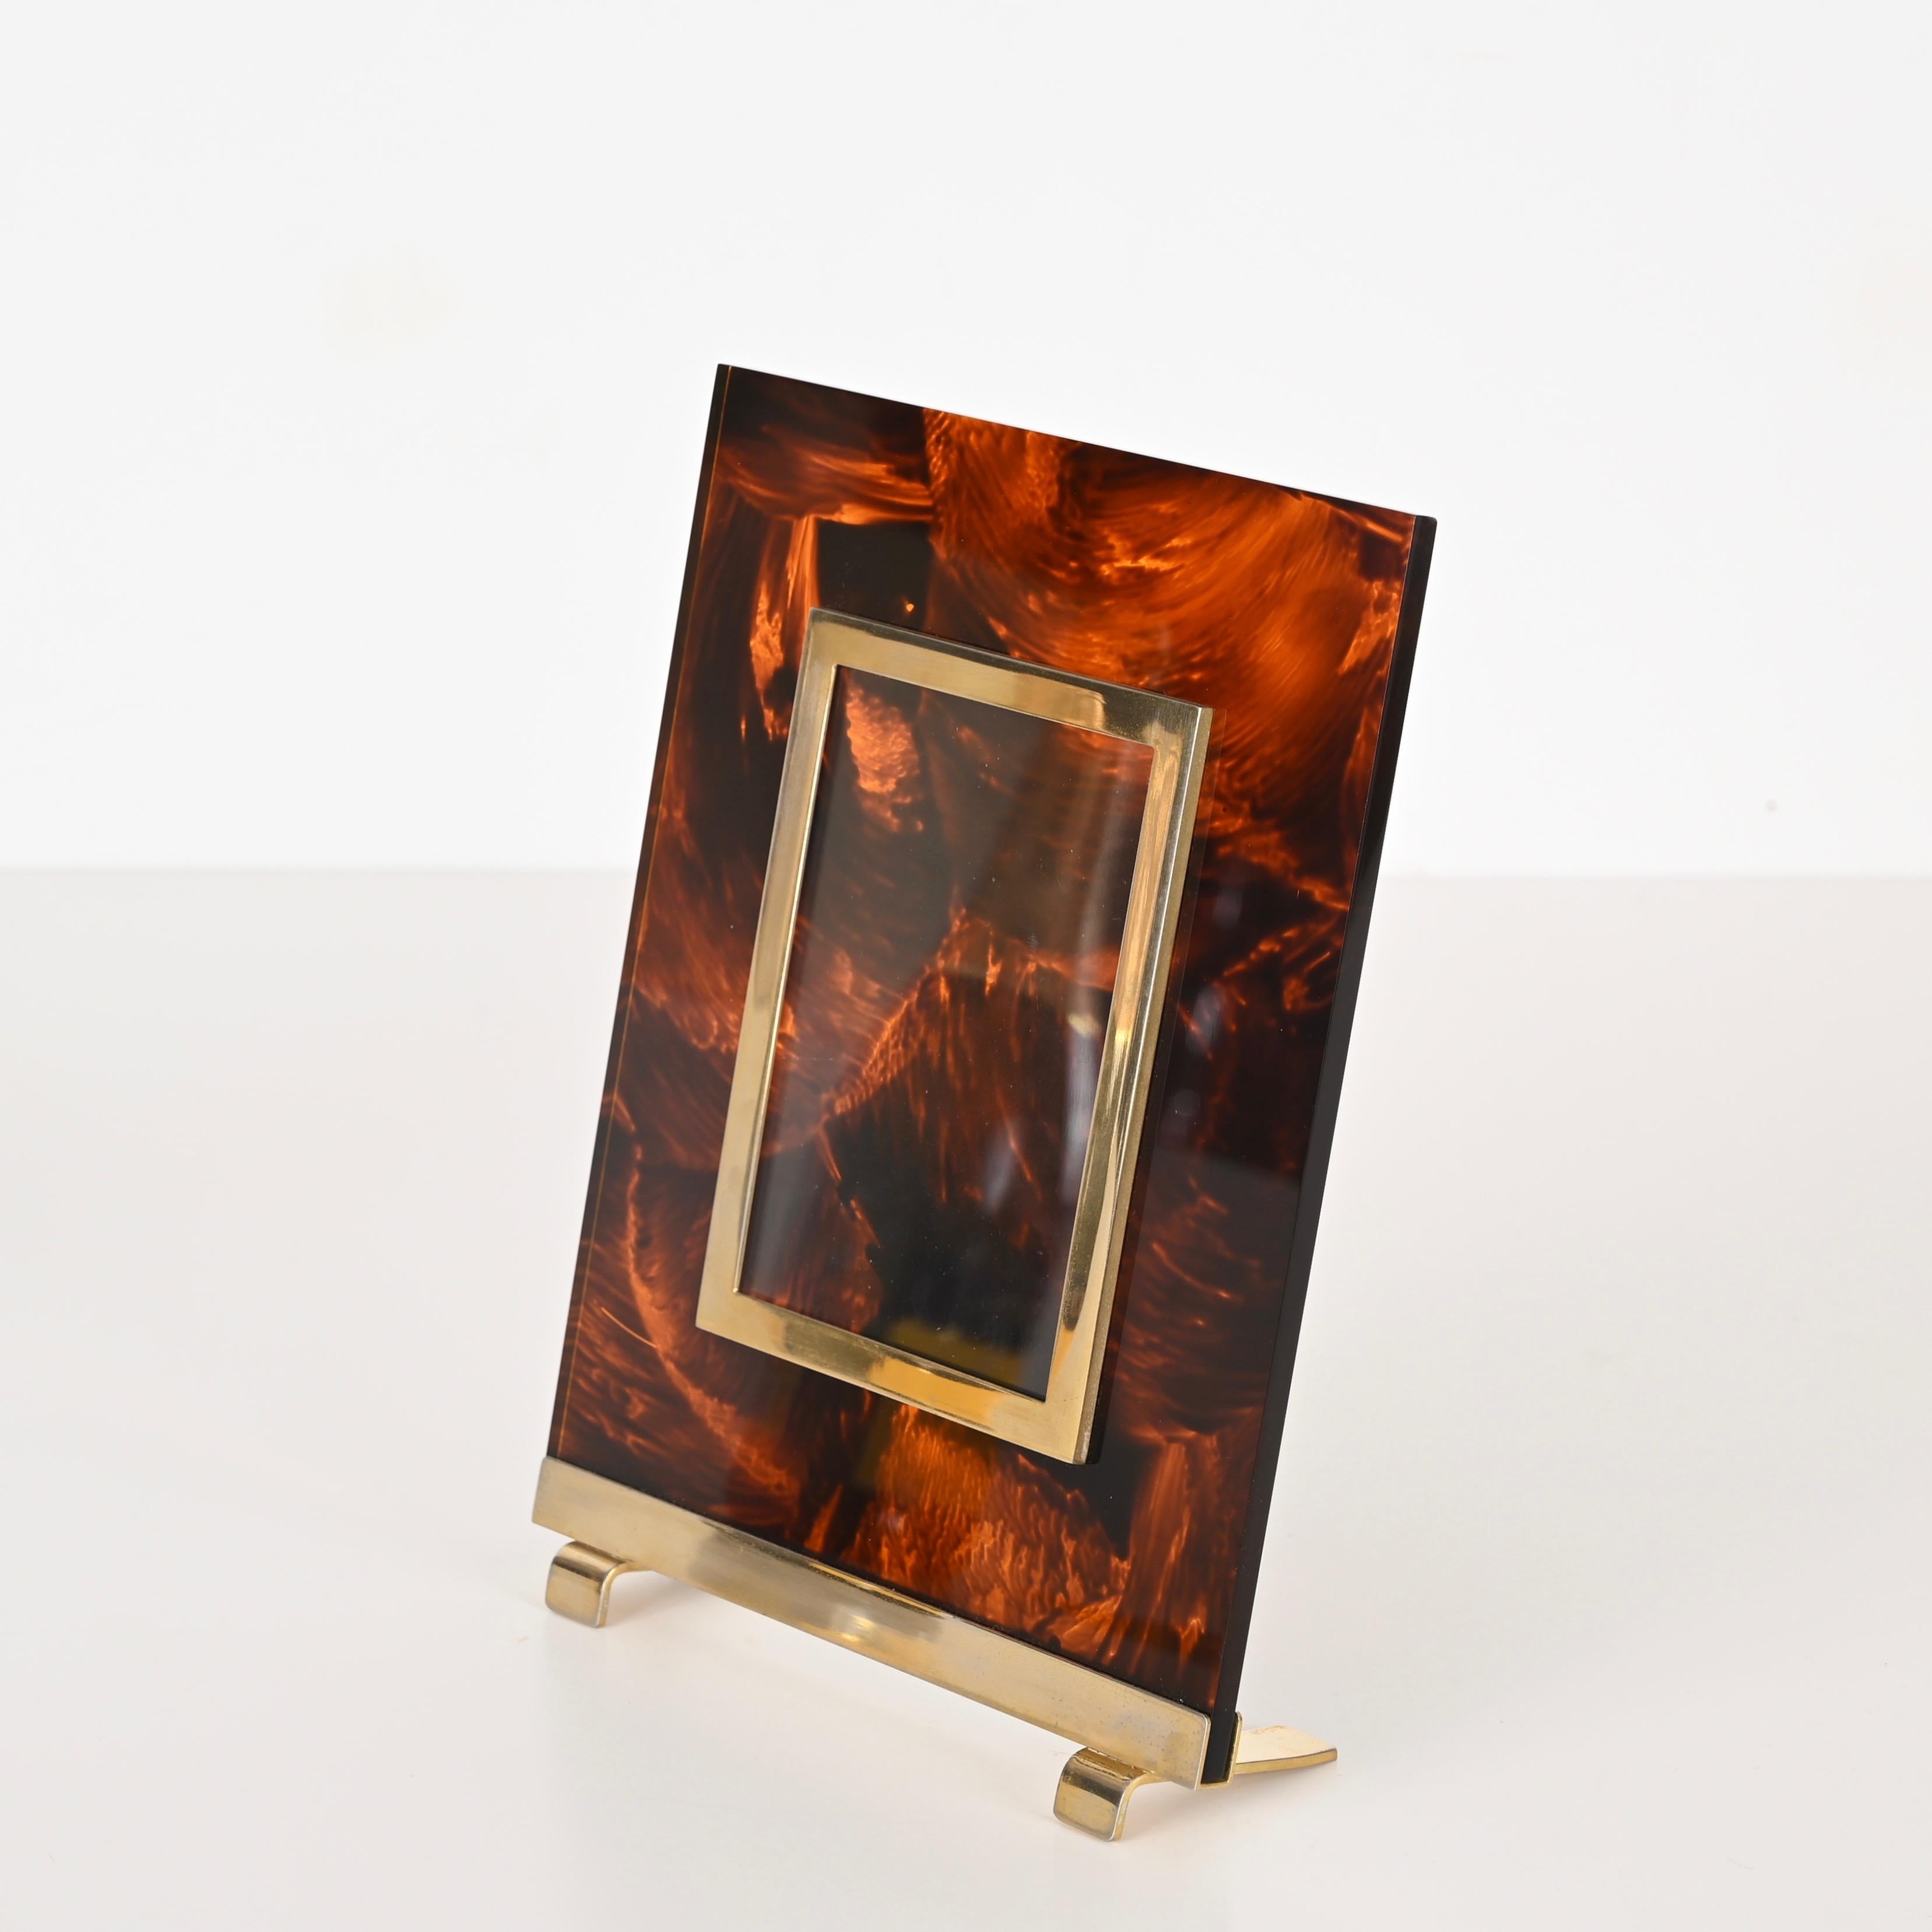 Stunning Mid-Century photo frame in tortoiseshell effect lucite and brass. This charming piece was made in Italy during the 1970s and is attributed to a Christian Dior production.

The body of this delightful photo frame is made in lucite with a